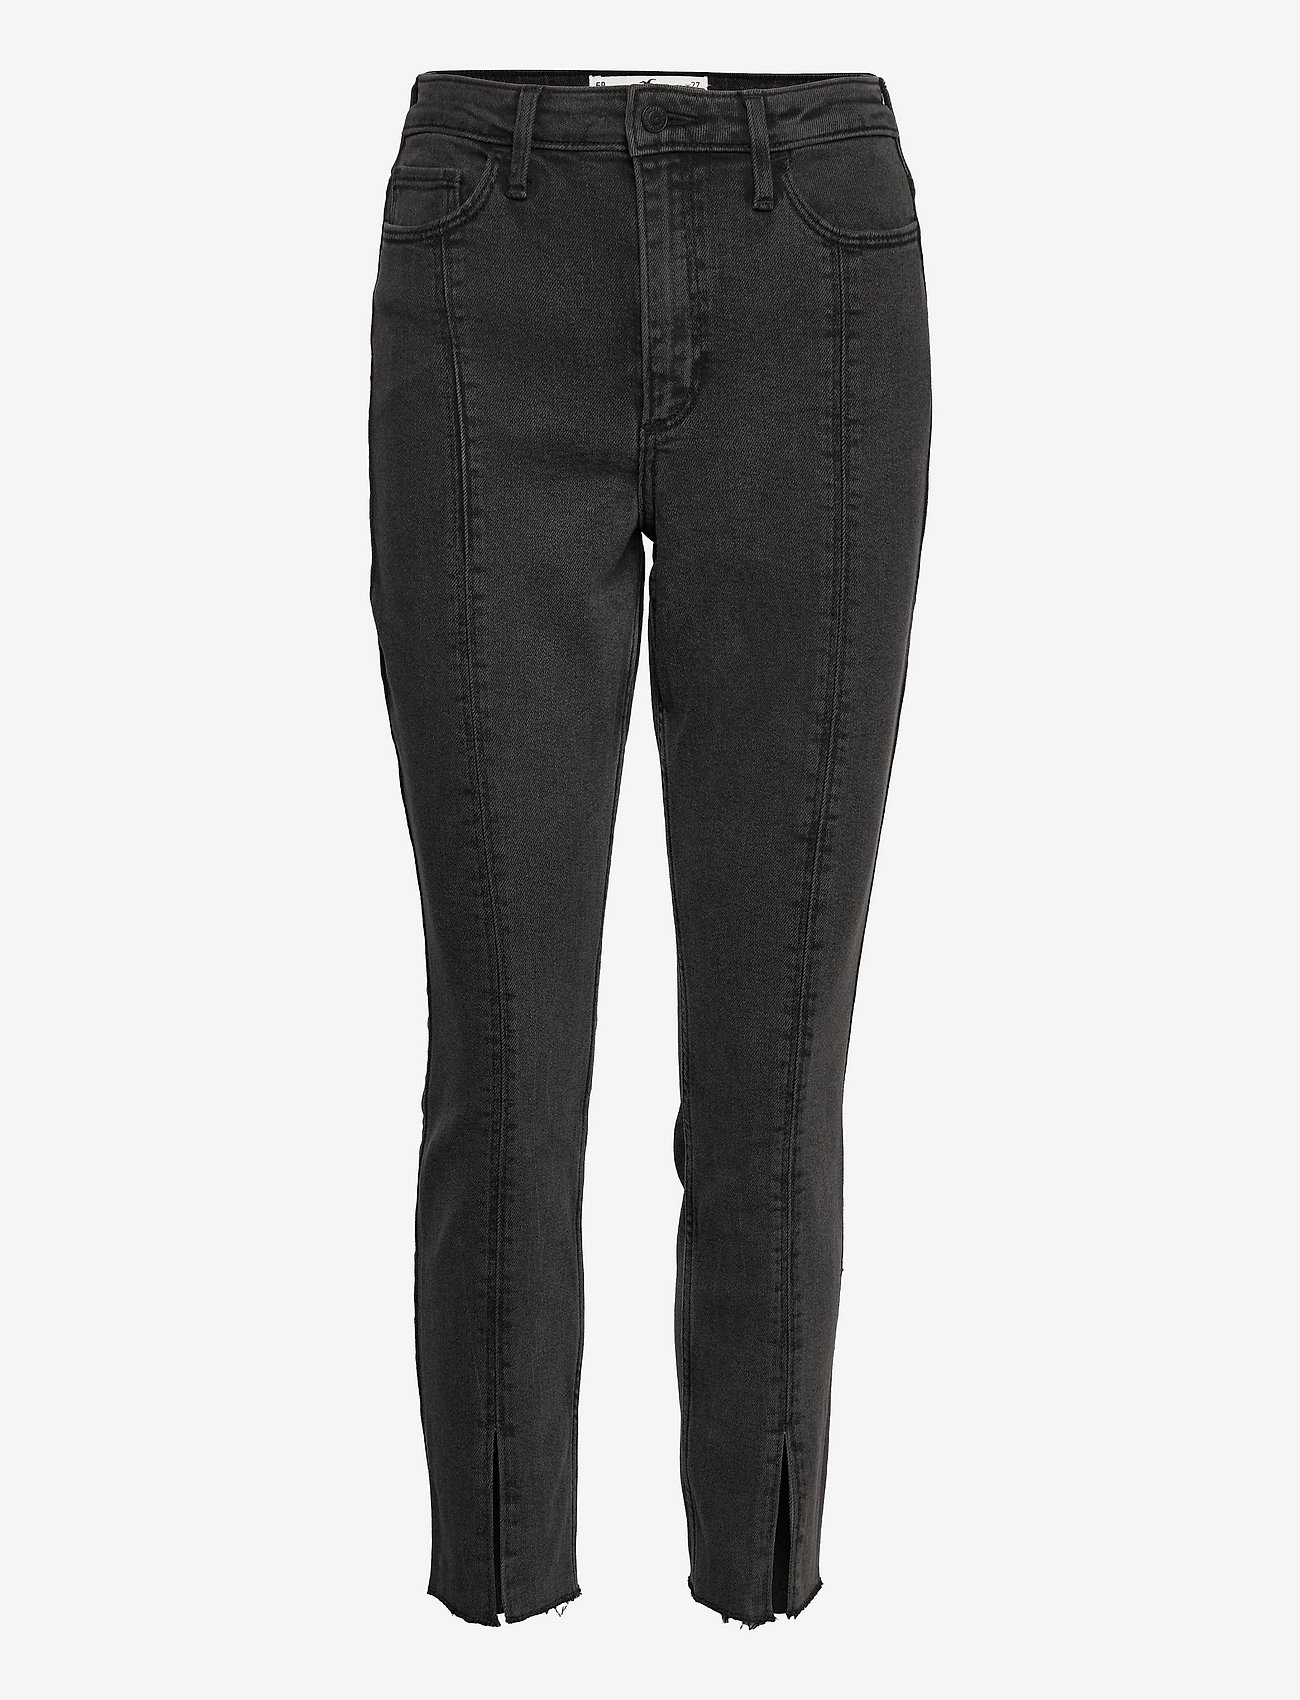 Hollister - HCo. GIRLS JEANS - slim fit jeans - curvy black redone ultra high rise skinny ankle - 0